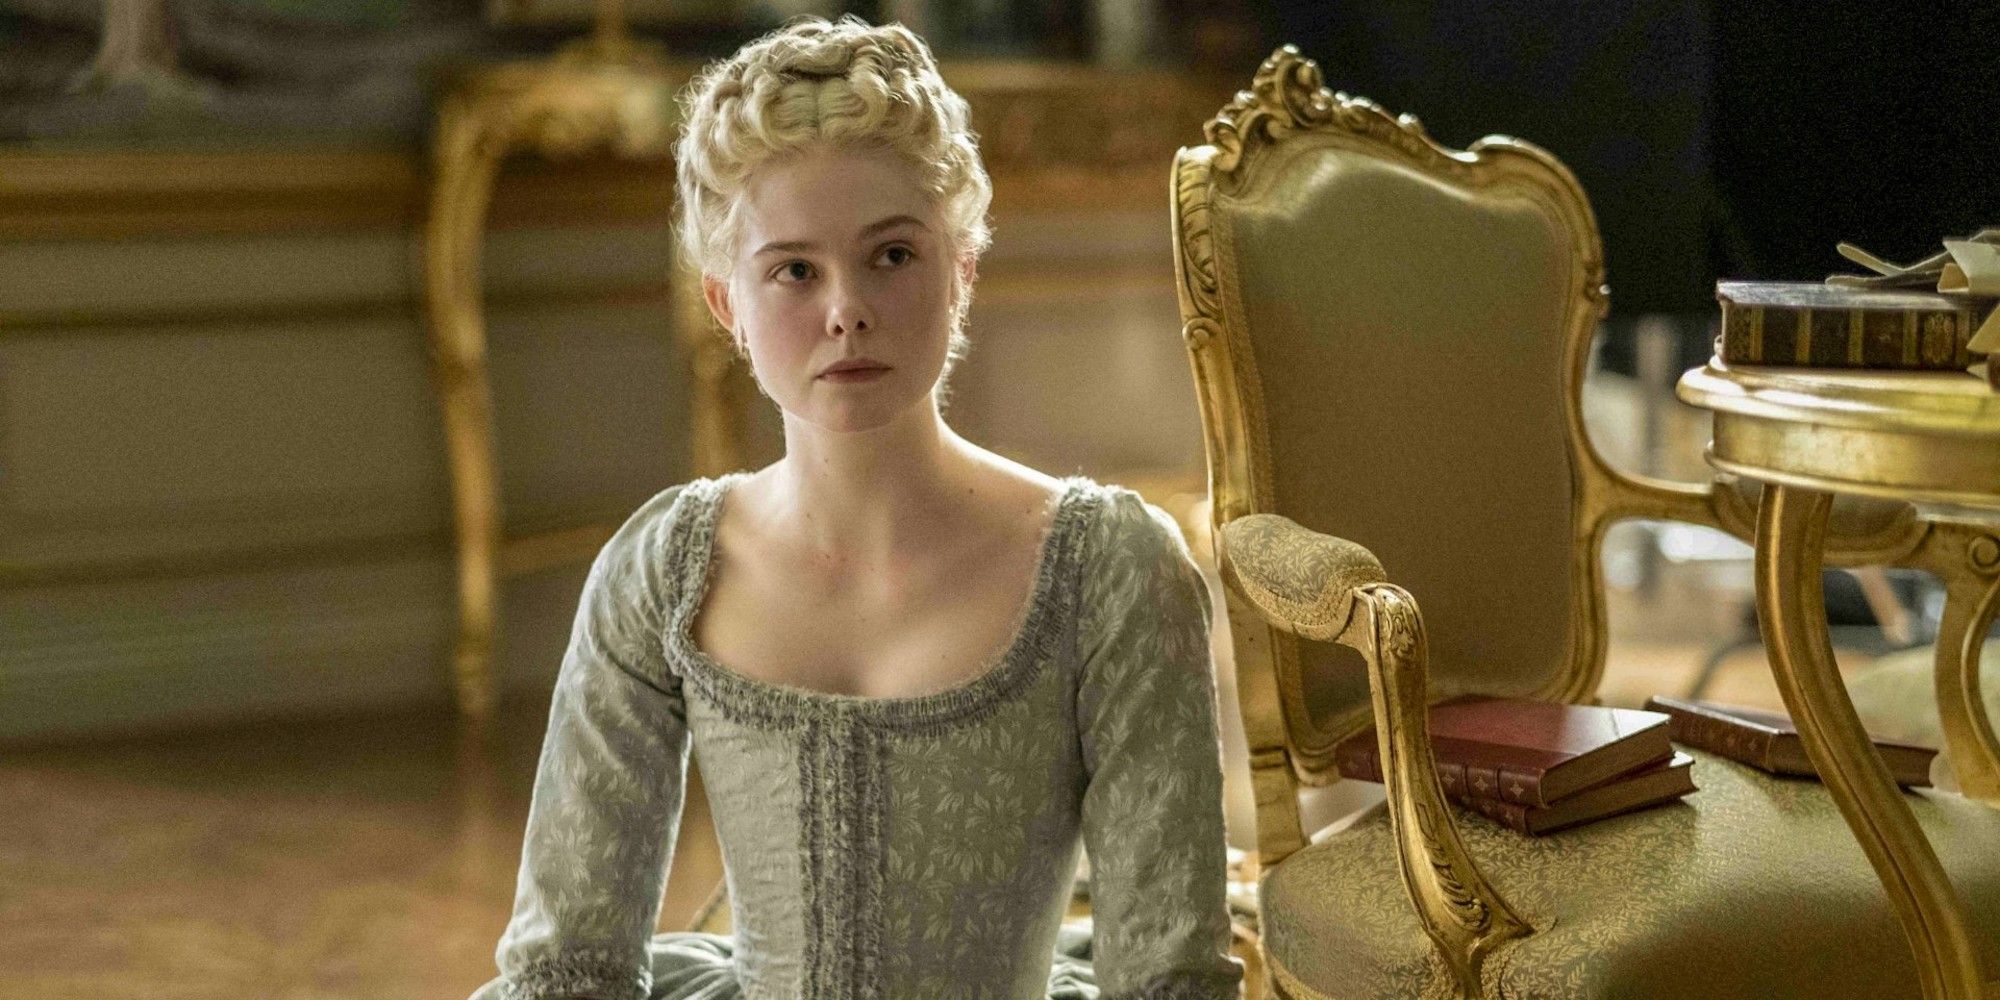 Elle Fanning in The Great, a period drama series set in 18th century Russia.